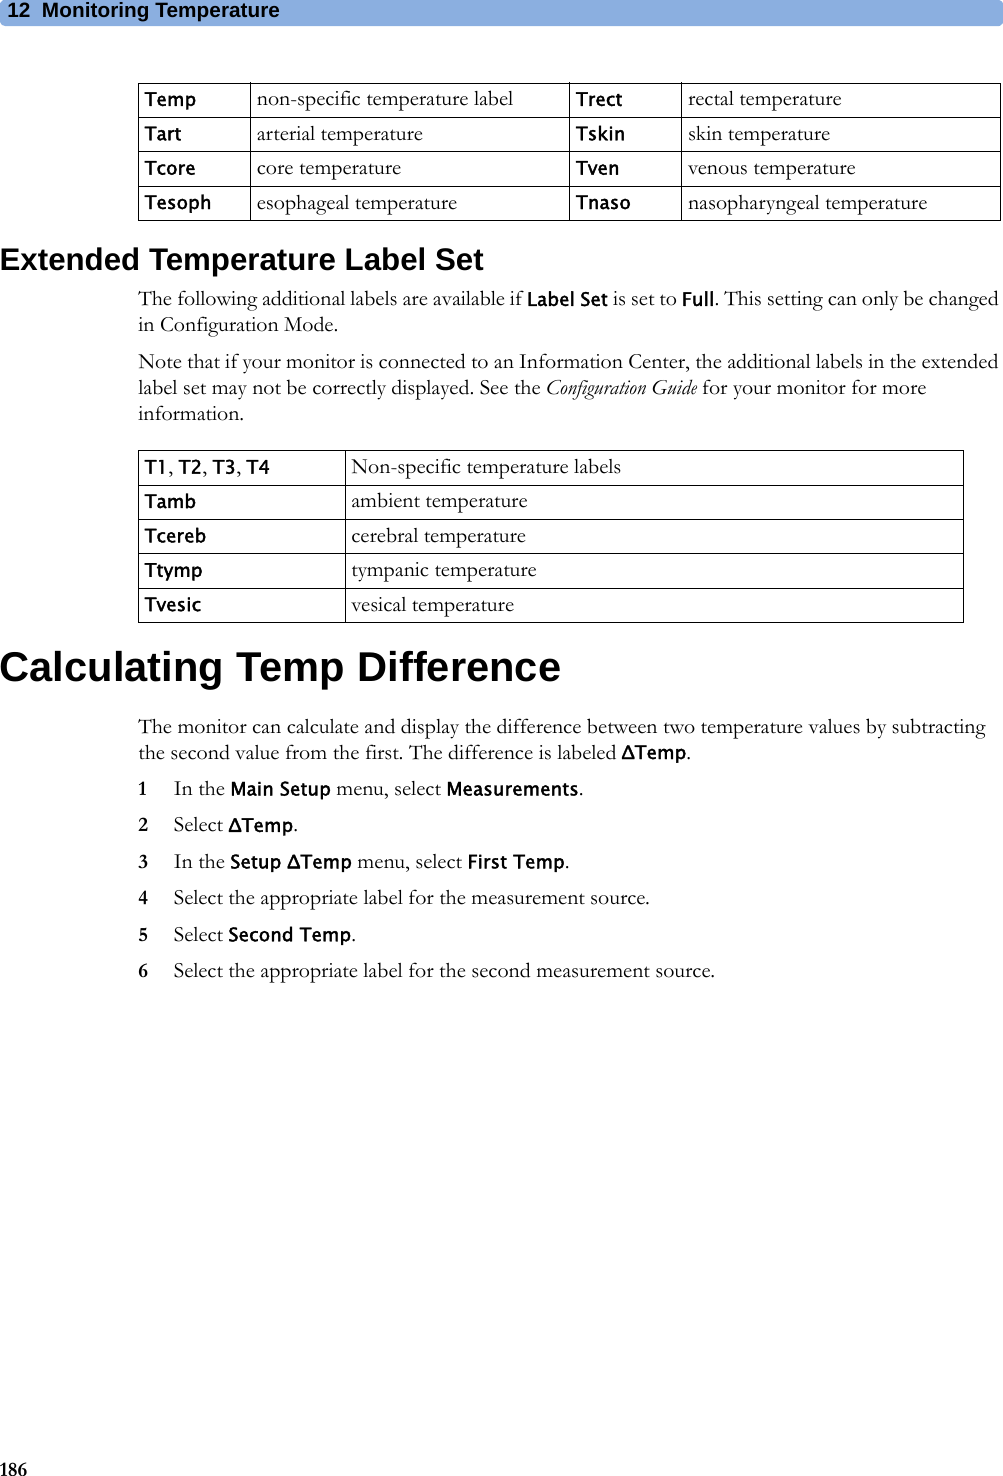 12 Monitoring Temperature186Extended Temperature Label SetThe following additional labels are available if Label Set is set to Full. This setting can only be changed in Configuration Mode.Note that if your monitor is connected to an Information Center, the additional labels in the extended label set may not be correctly displayed. See the Configuration Guide for your monitor for more information.Calculating Temp DifferenceThe monitor can calculate and display the difference between two temperature values by subtracting the second value from the first. The difference is labeled ΔTemp.1In the Main Setup menu, select Measurements.2Select ΔTemp.3In the Setup ΔTemp menu, select First Temp.4Select the appropriate label for the measurement source.5Select Second Temp.6Select the appropriate label for the second measurement source.Temp non-specific temperature label Trect rectal temperatureTart arterial temperature Tskin skin temperatureTcore core temperature Tven venous temperatureTesoph esophageal temperature Tnaso nasopharyngeal temperatureT1, T2, T3, T4 Non-specific temperature labelsTamb ambient temperatureTcereb cerebral temperatureTtymp tympanic temperatureTvesic vesical temperature